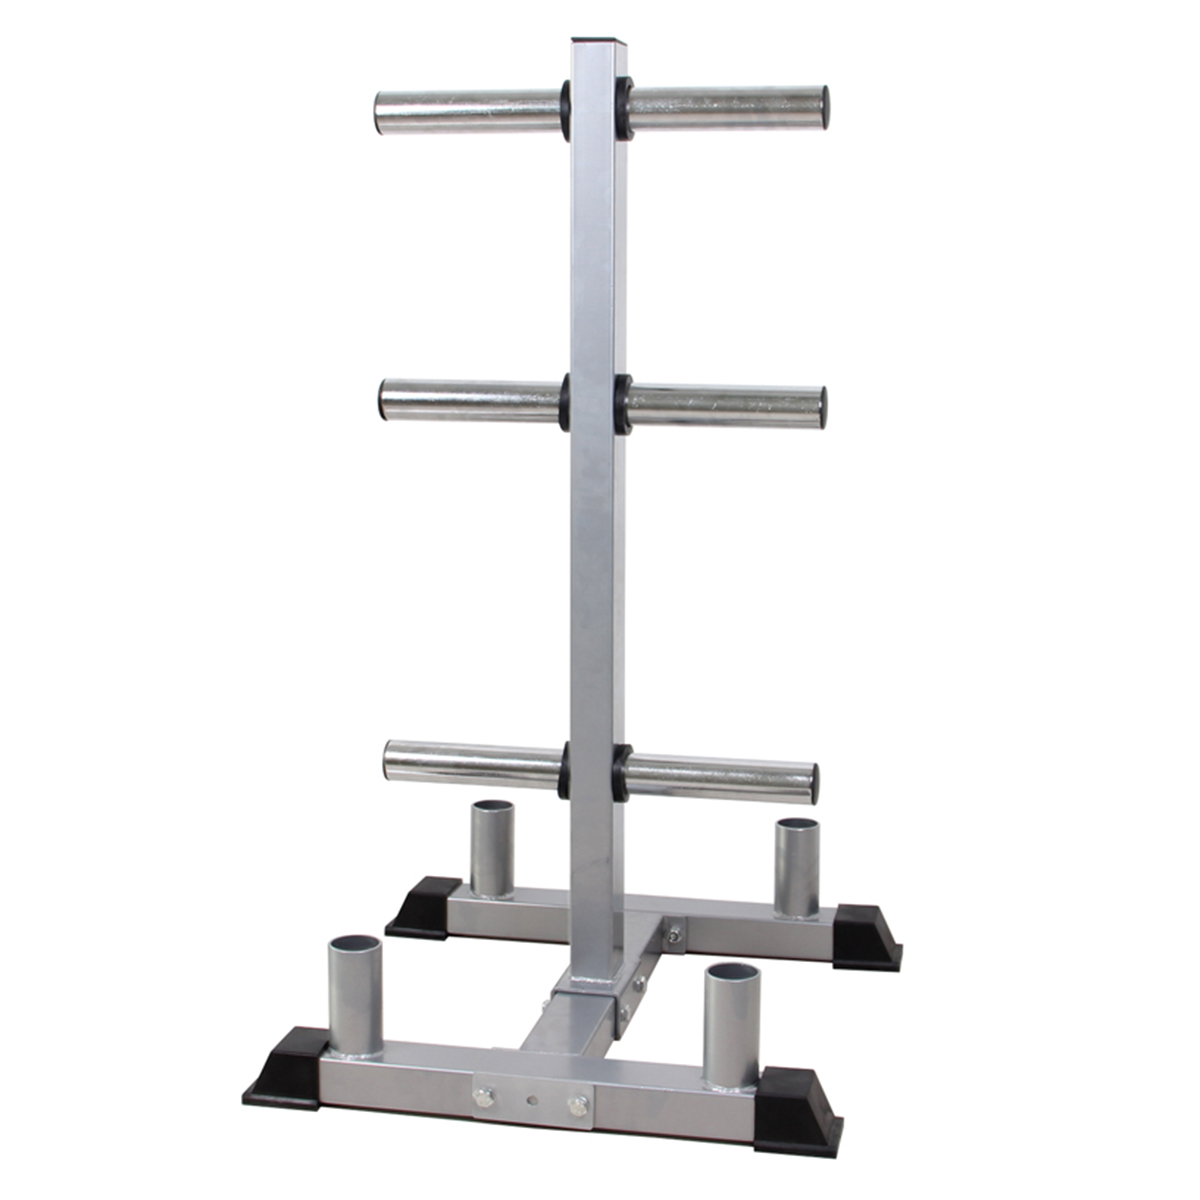 Bumper-Weight-Plate-Storage-Tree-Rack-Olympic-Barbell-Bar-Stand-Holder-Organizer-1766049-5